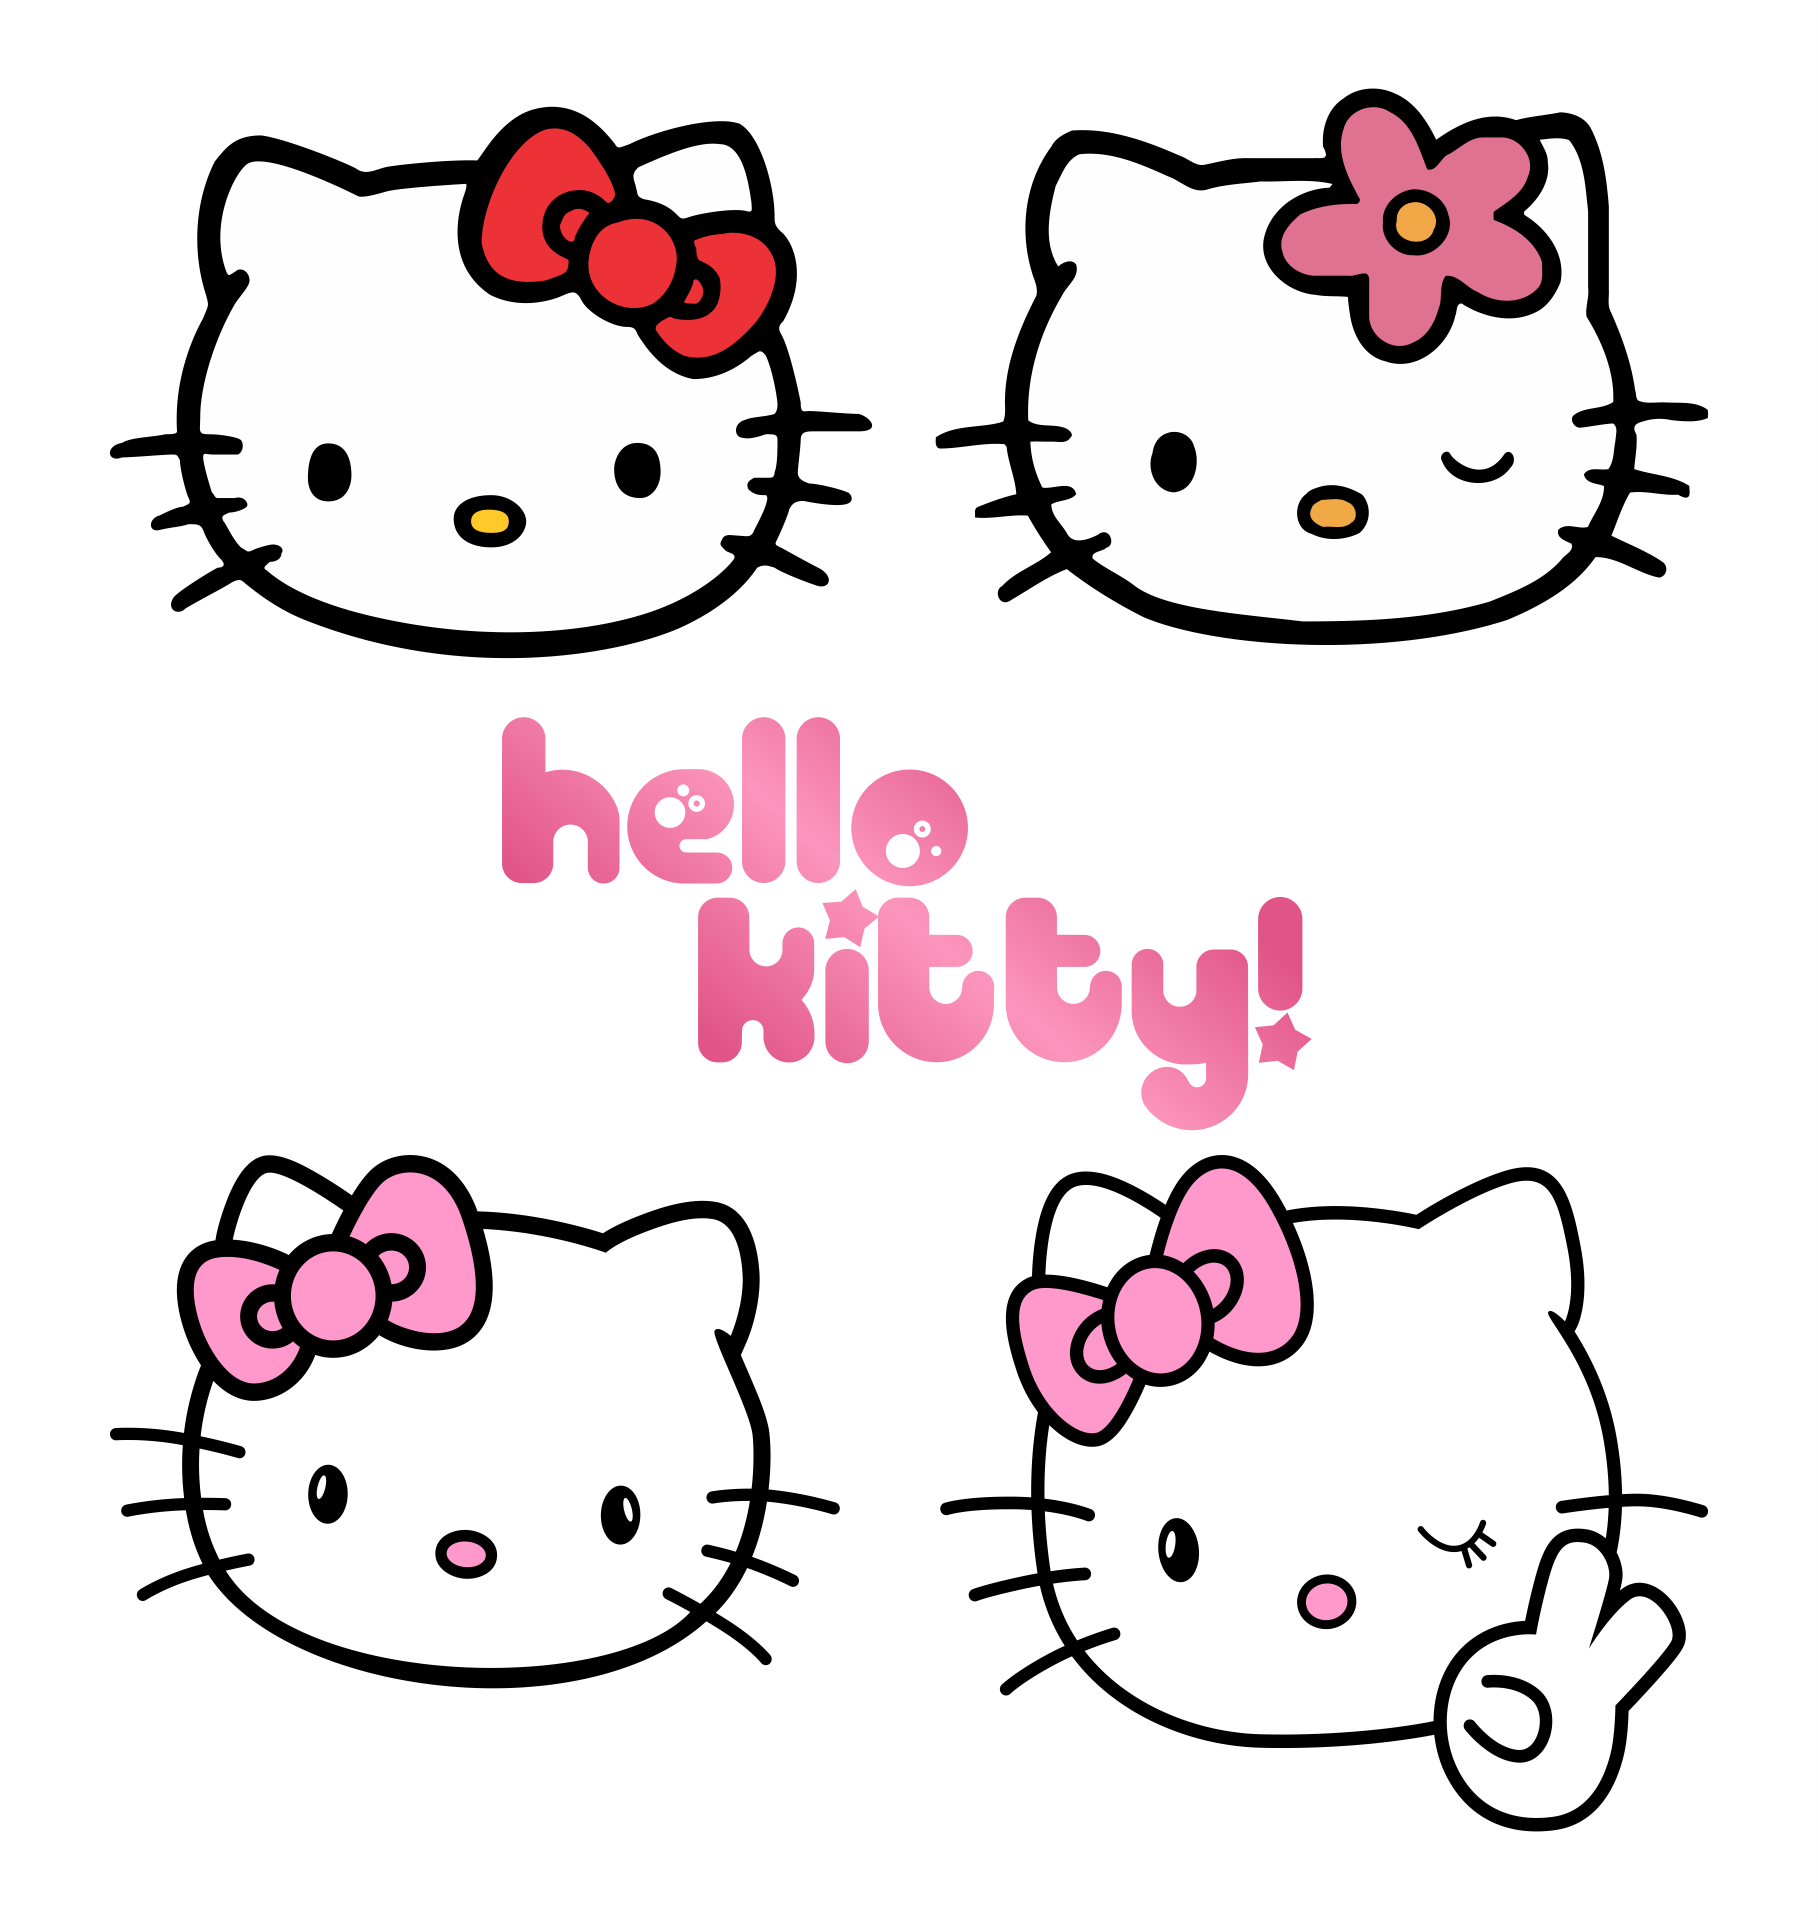 20 Best Printable Hello Kitty Face PDF For Free At Printablee Hello Kitty Birthday Hello Kitty Hello Kitty Crafts